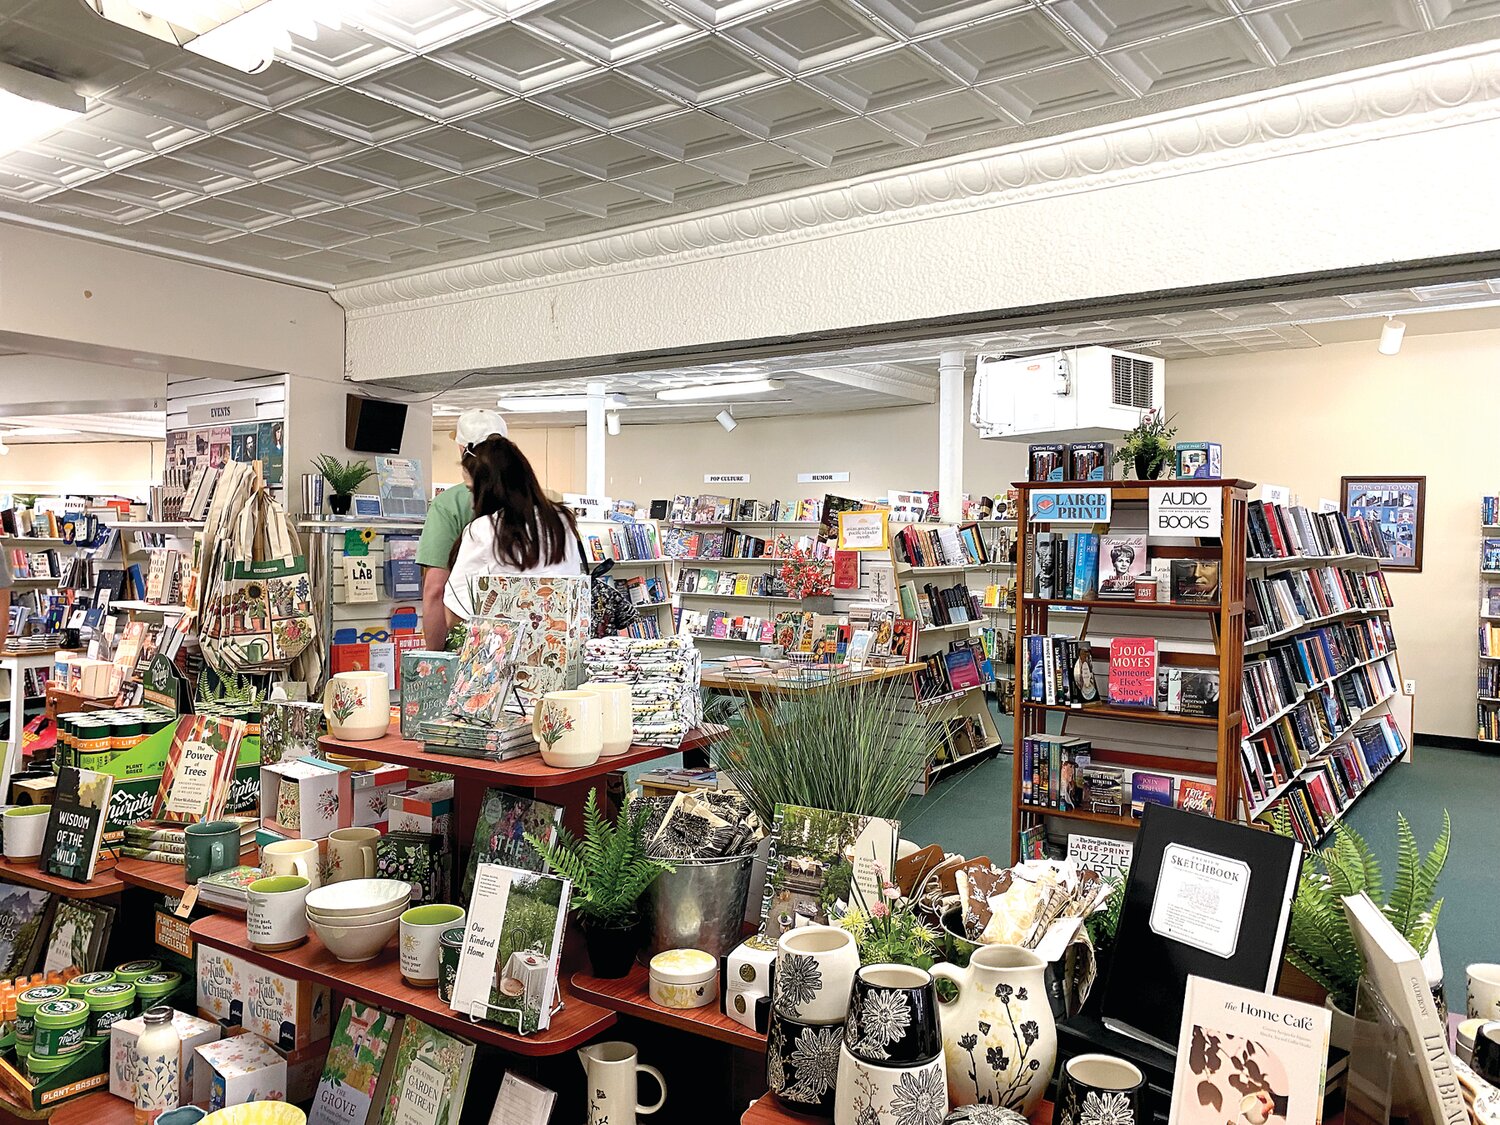 Besides an abundance of books and magazines, the Doylestown Bookshop is a favorite stop for anyone looking for a perfect gift.